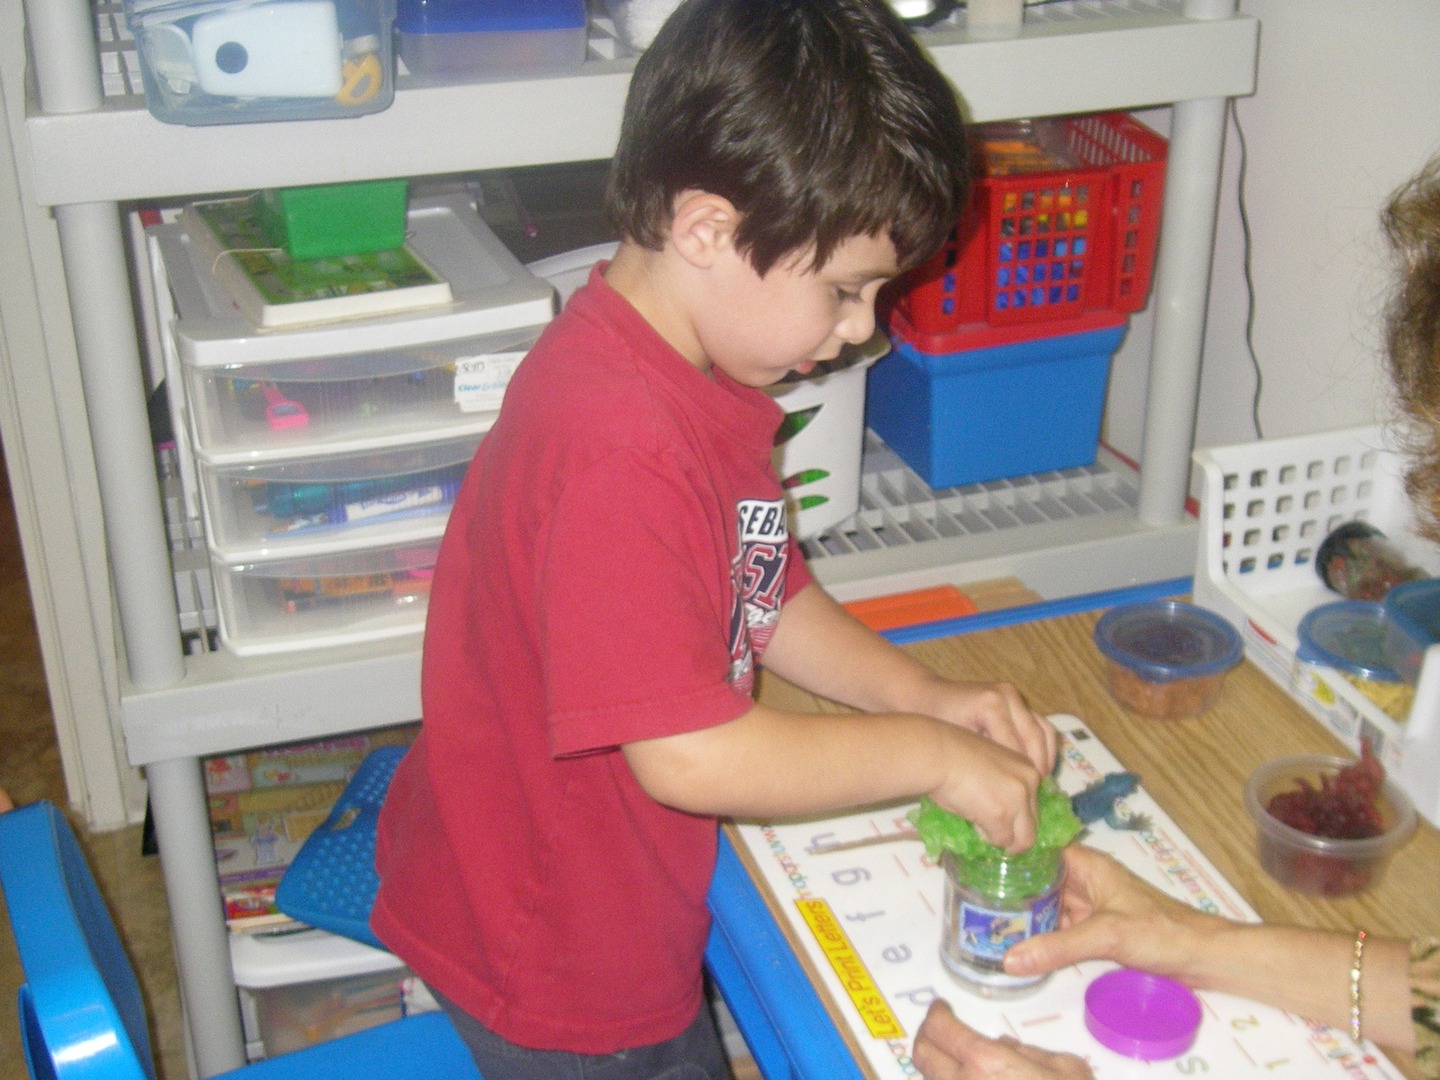 A young boy is painting with his hands.